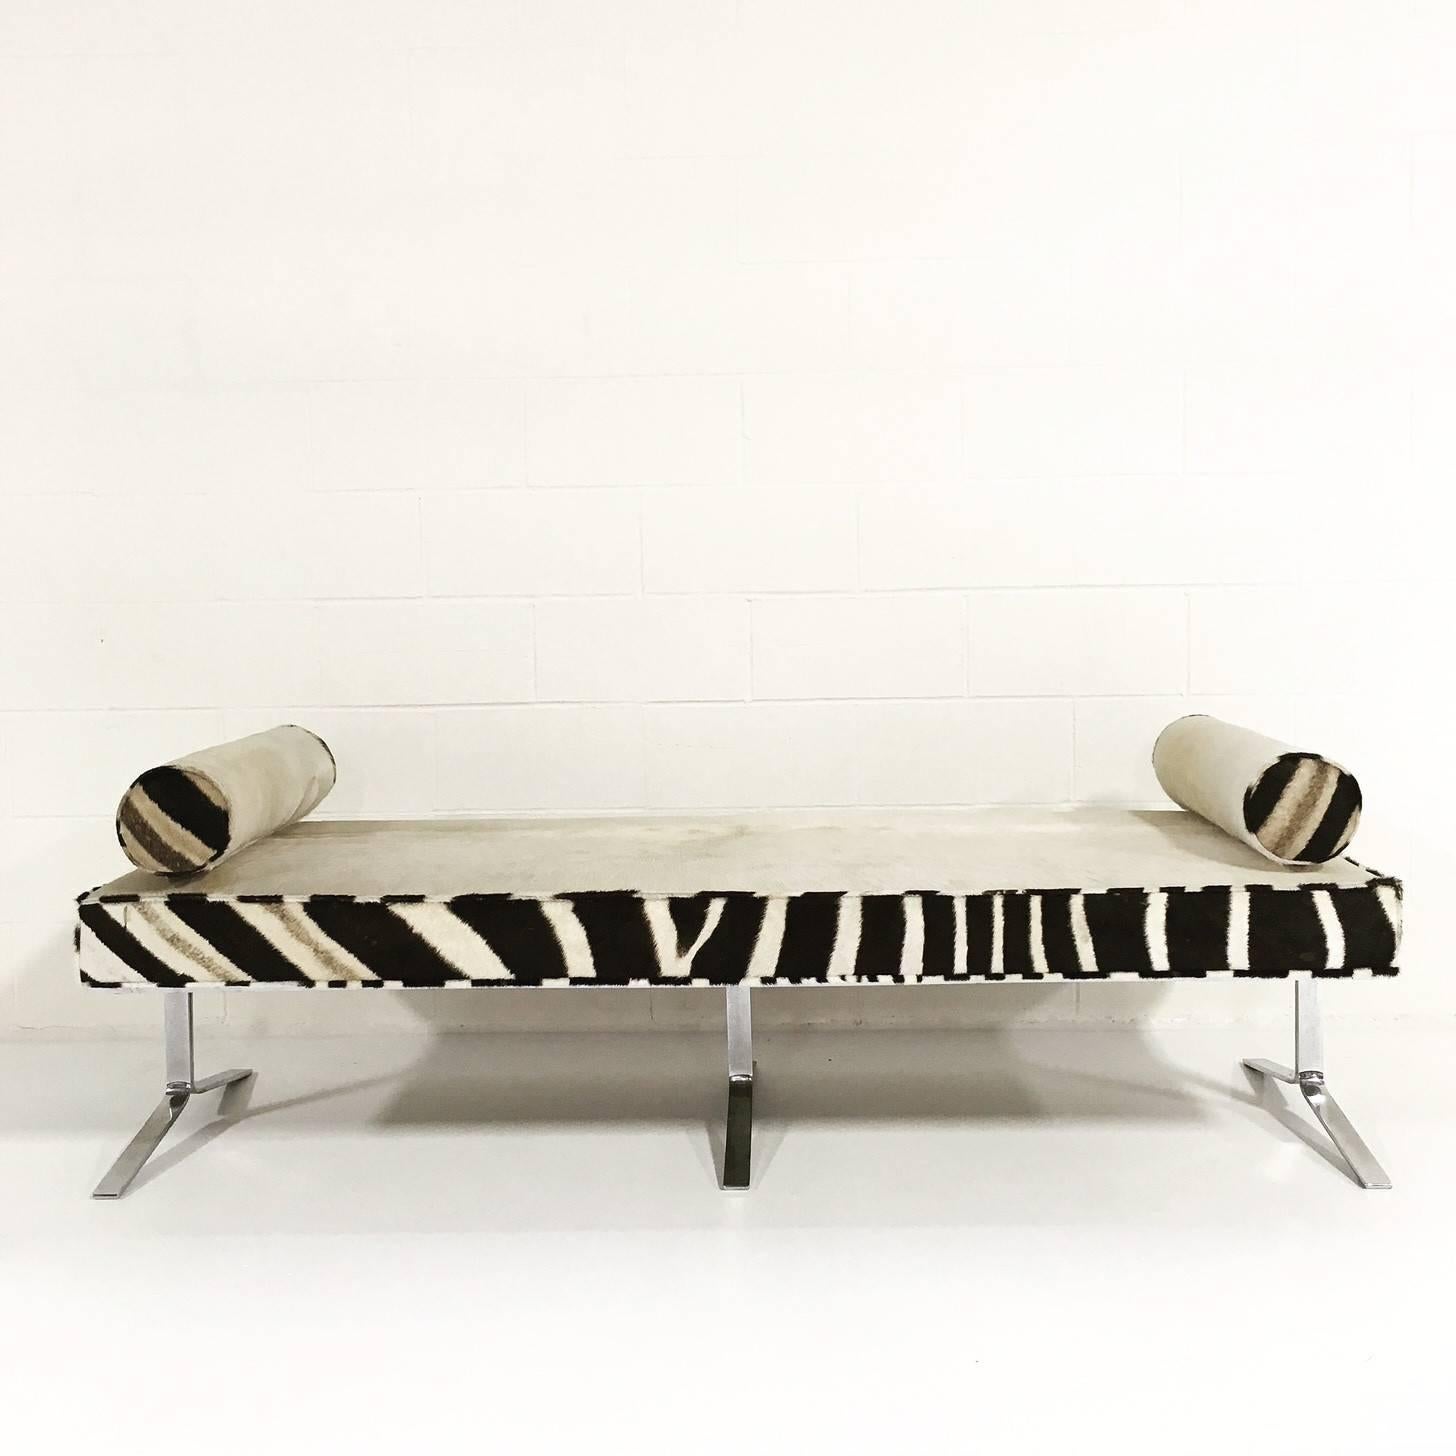 We keep picturing this amazing bench at the end of a beautiful bed. Ivory cowhide and zebra hide pair so well together. With the hint of slick chrome on the three base legs, this bench becomes a crazy beautiful work of modern art. A pair of